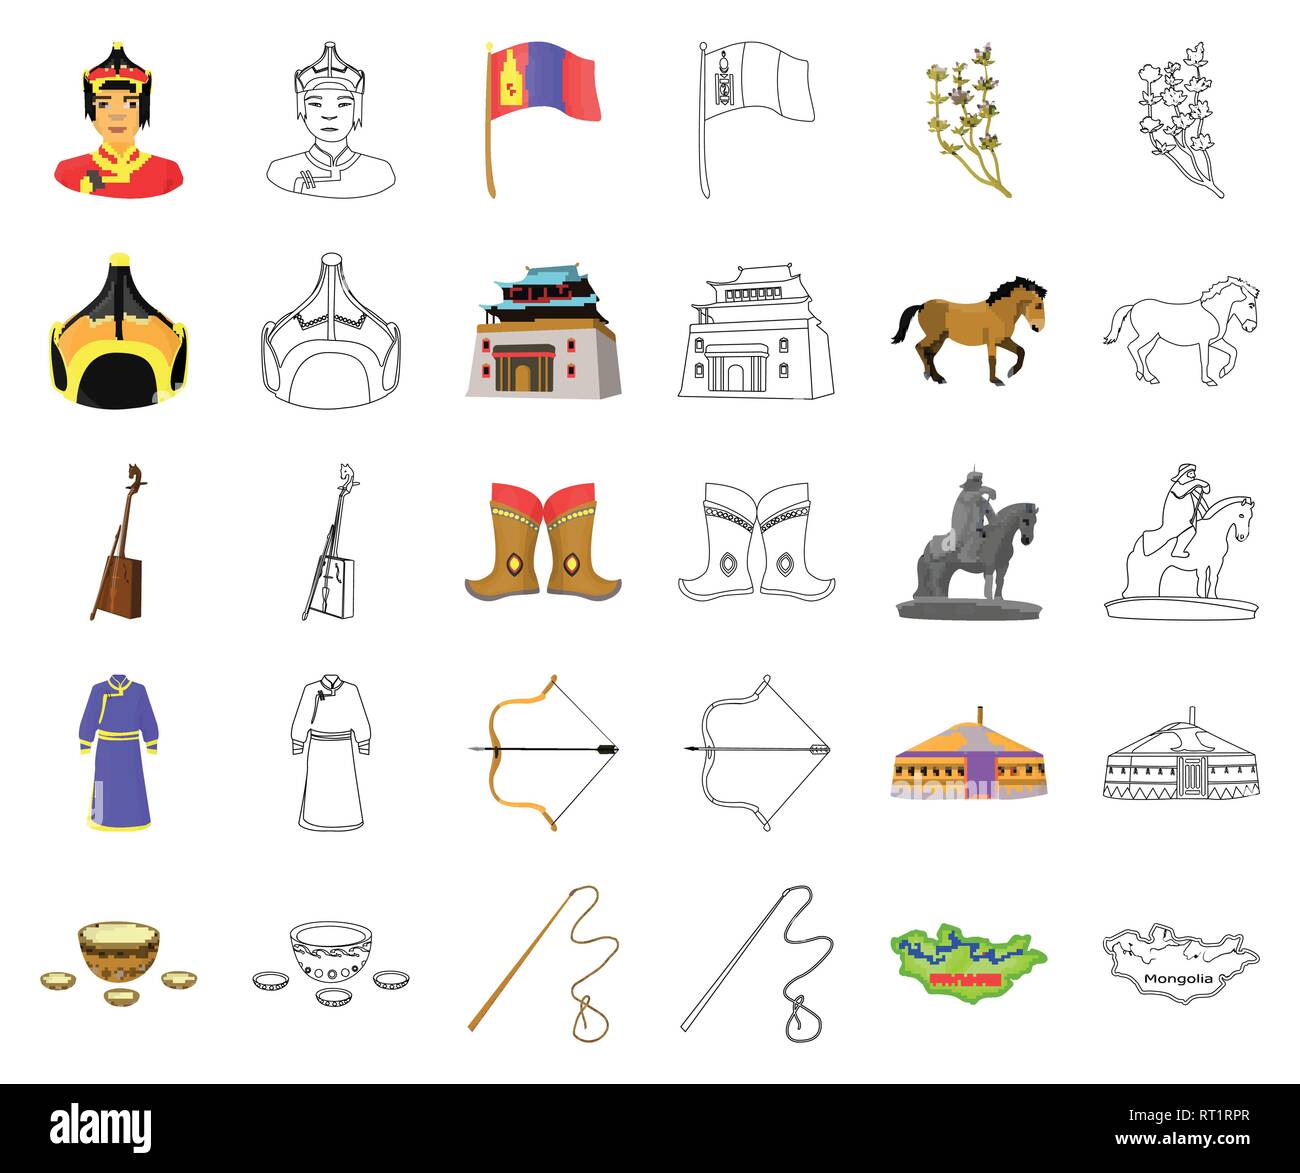 arms,arrow,belt,bow,buddhism,building,cartoon,outline,cashmere,coat,collection,country,culture,flag,flower,fur,genghis,gutuly,headdress,horse,hudak,icon,illustration,instrument,khan,kialis,kumis,landmark,leather,map,monastery,mongol,mongolia,monument,musical,nature,religion,robe,set,shoes,sign,spear,temple,territory,tradition,travel,vector,whip,wool,yurt Vector Vectors , Stock Vector